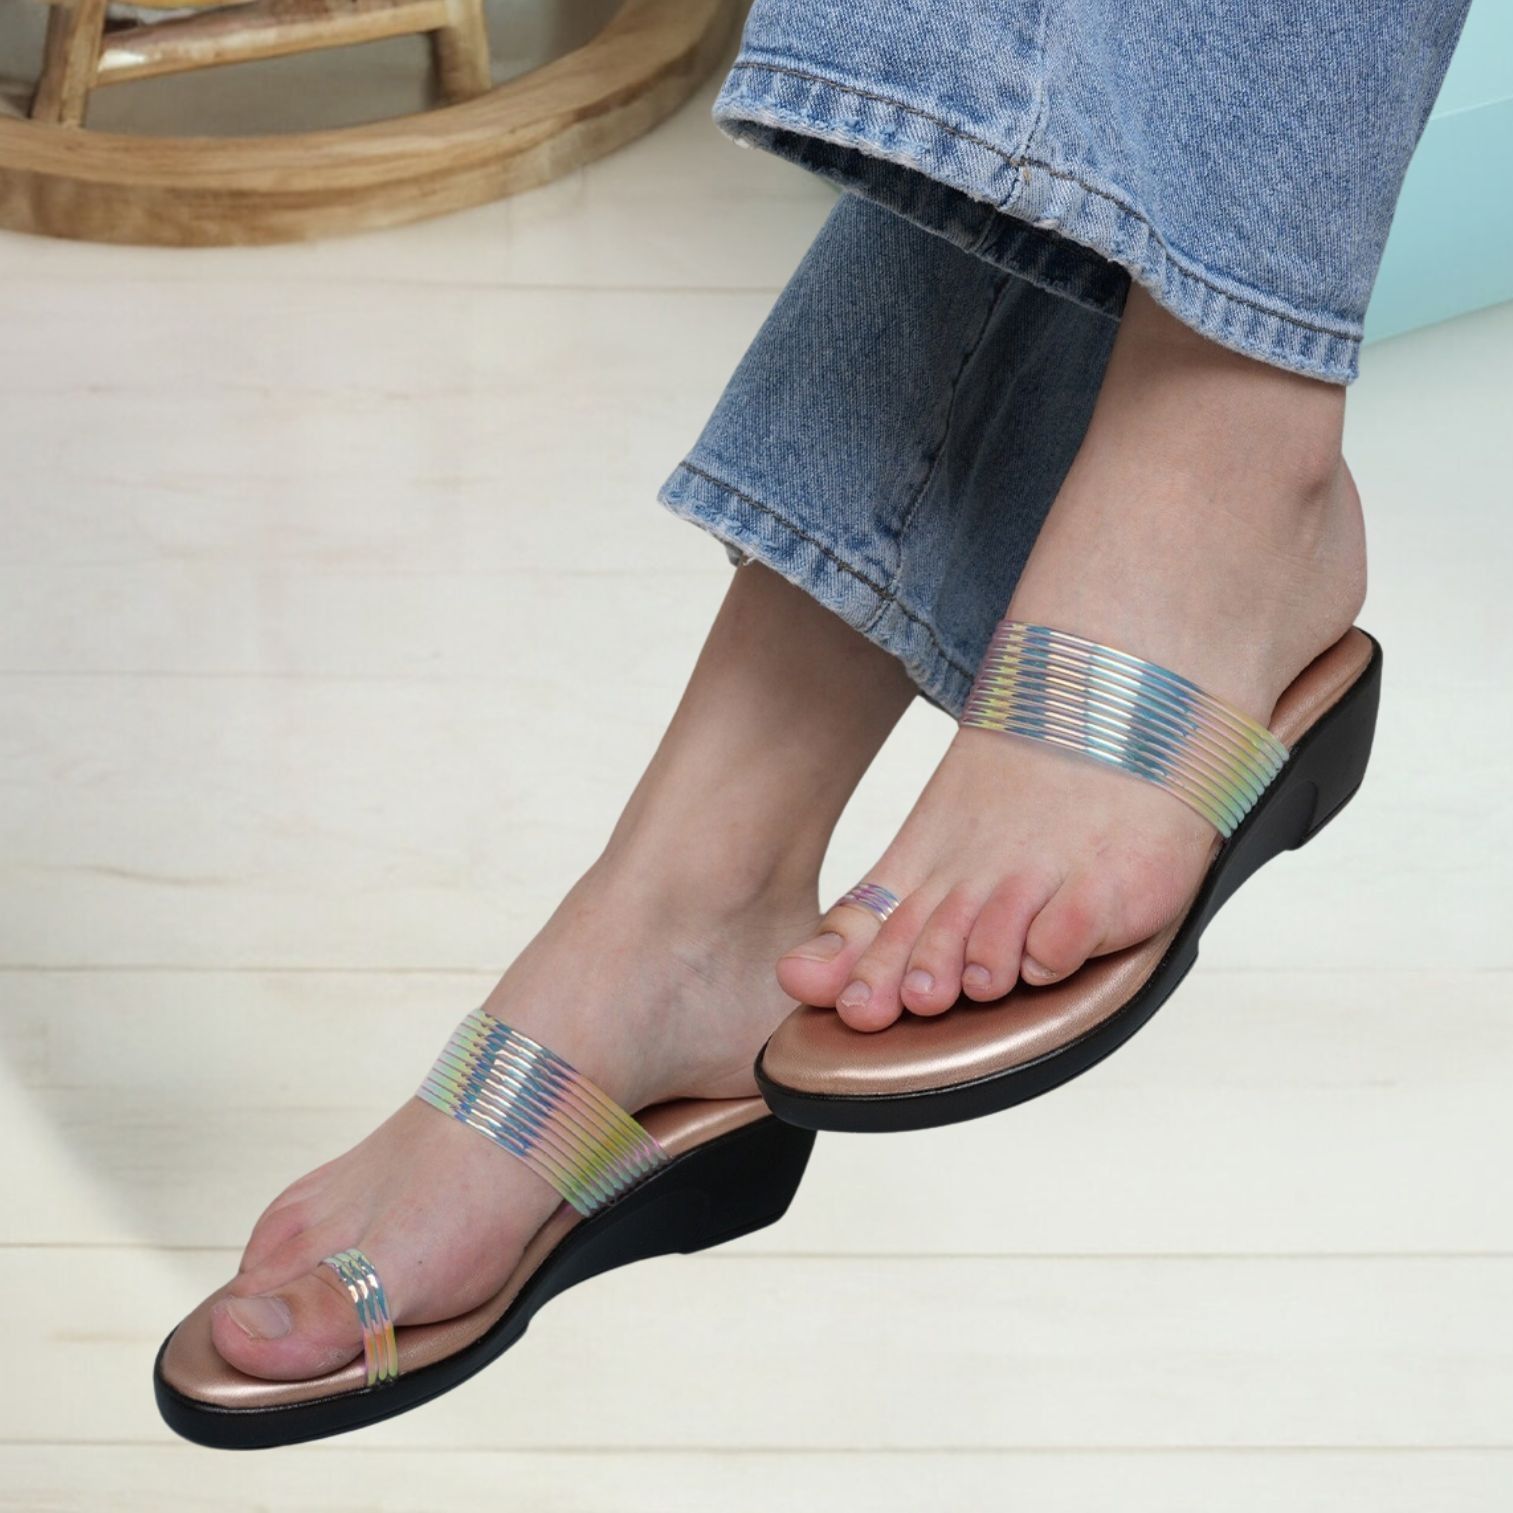 JM LOOKS Women' Platform Multi Wedges High Heel Fashion Sandal Comfortable  and Stylish Wedge For Casual Wear & Formal Wear Occasions